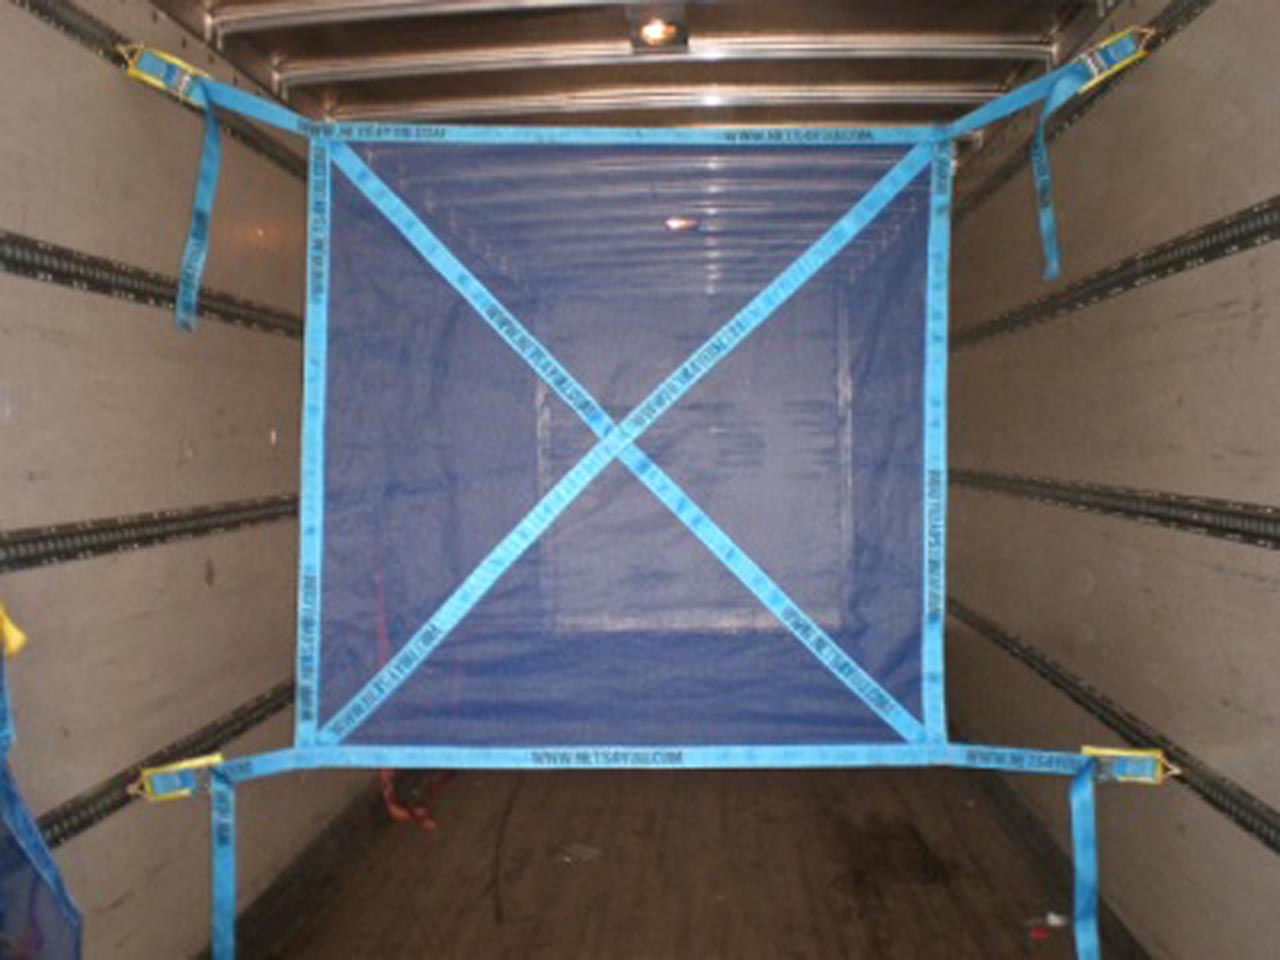 Load restraint net fitted in a vehicle.